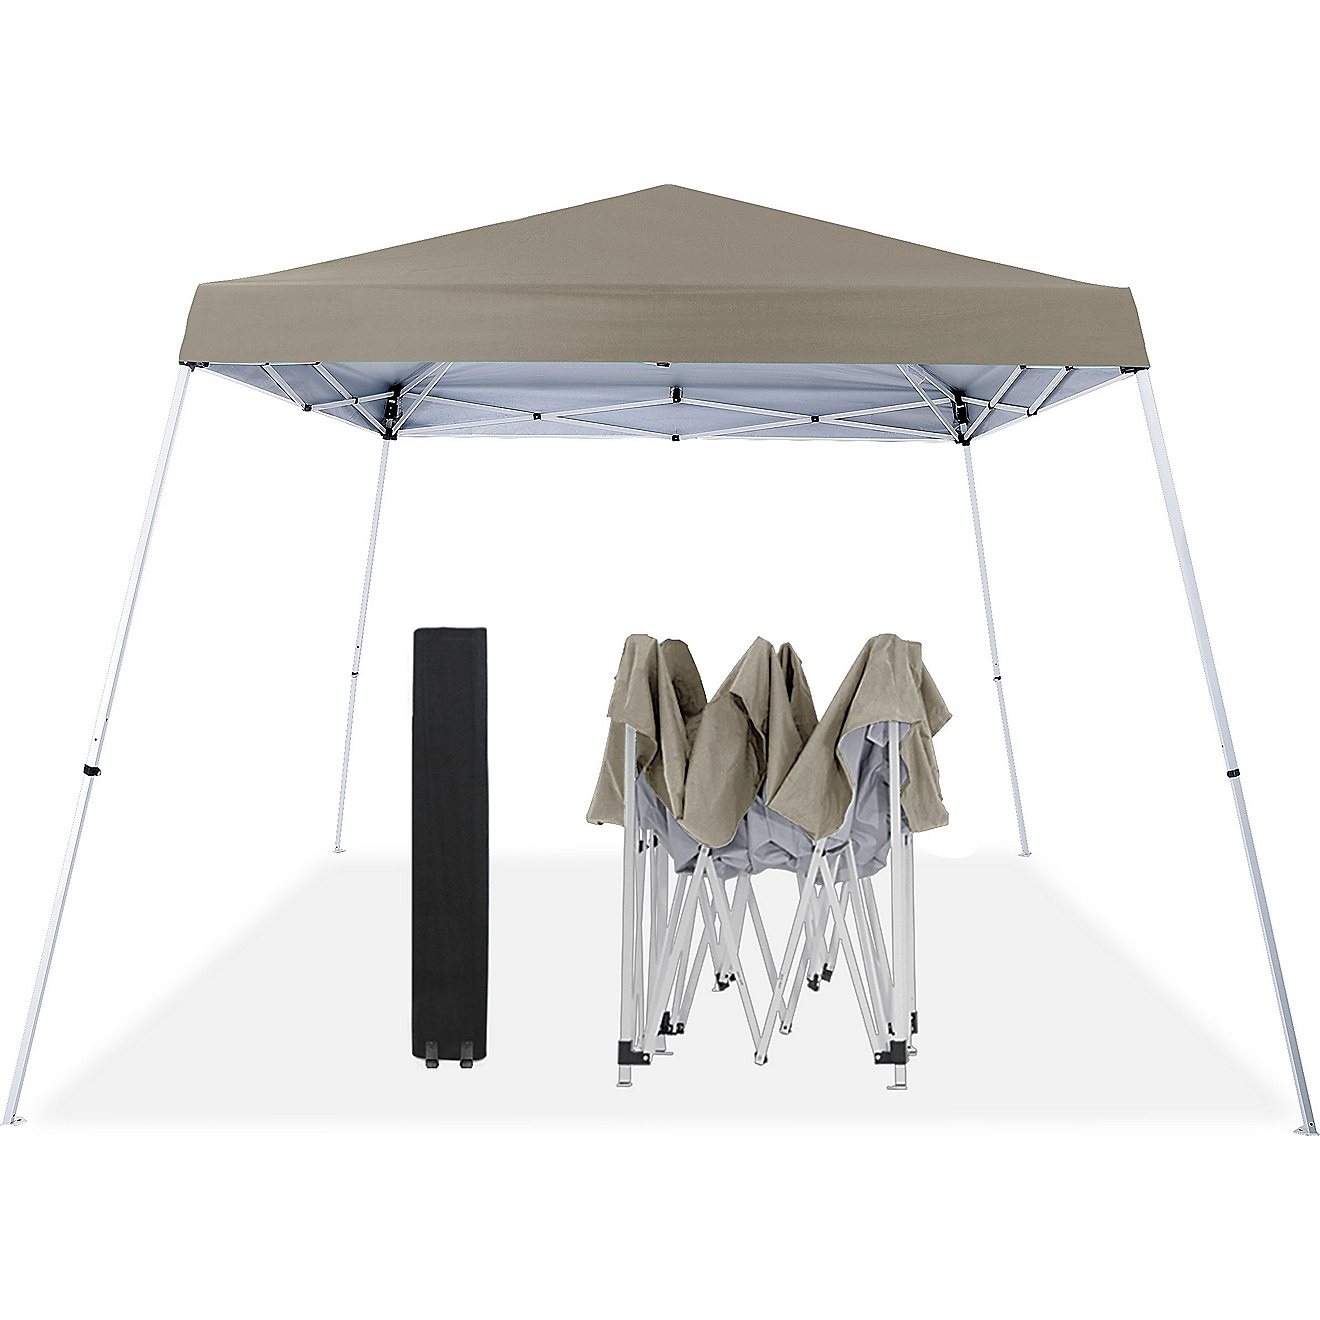 Academy Sports + Outdoors Easy Shade 10 ft x 10 ft Slant Leg Canopy                                                              - view number 2